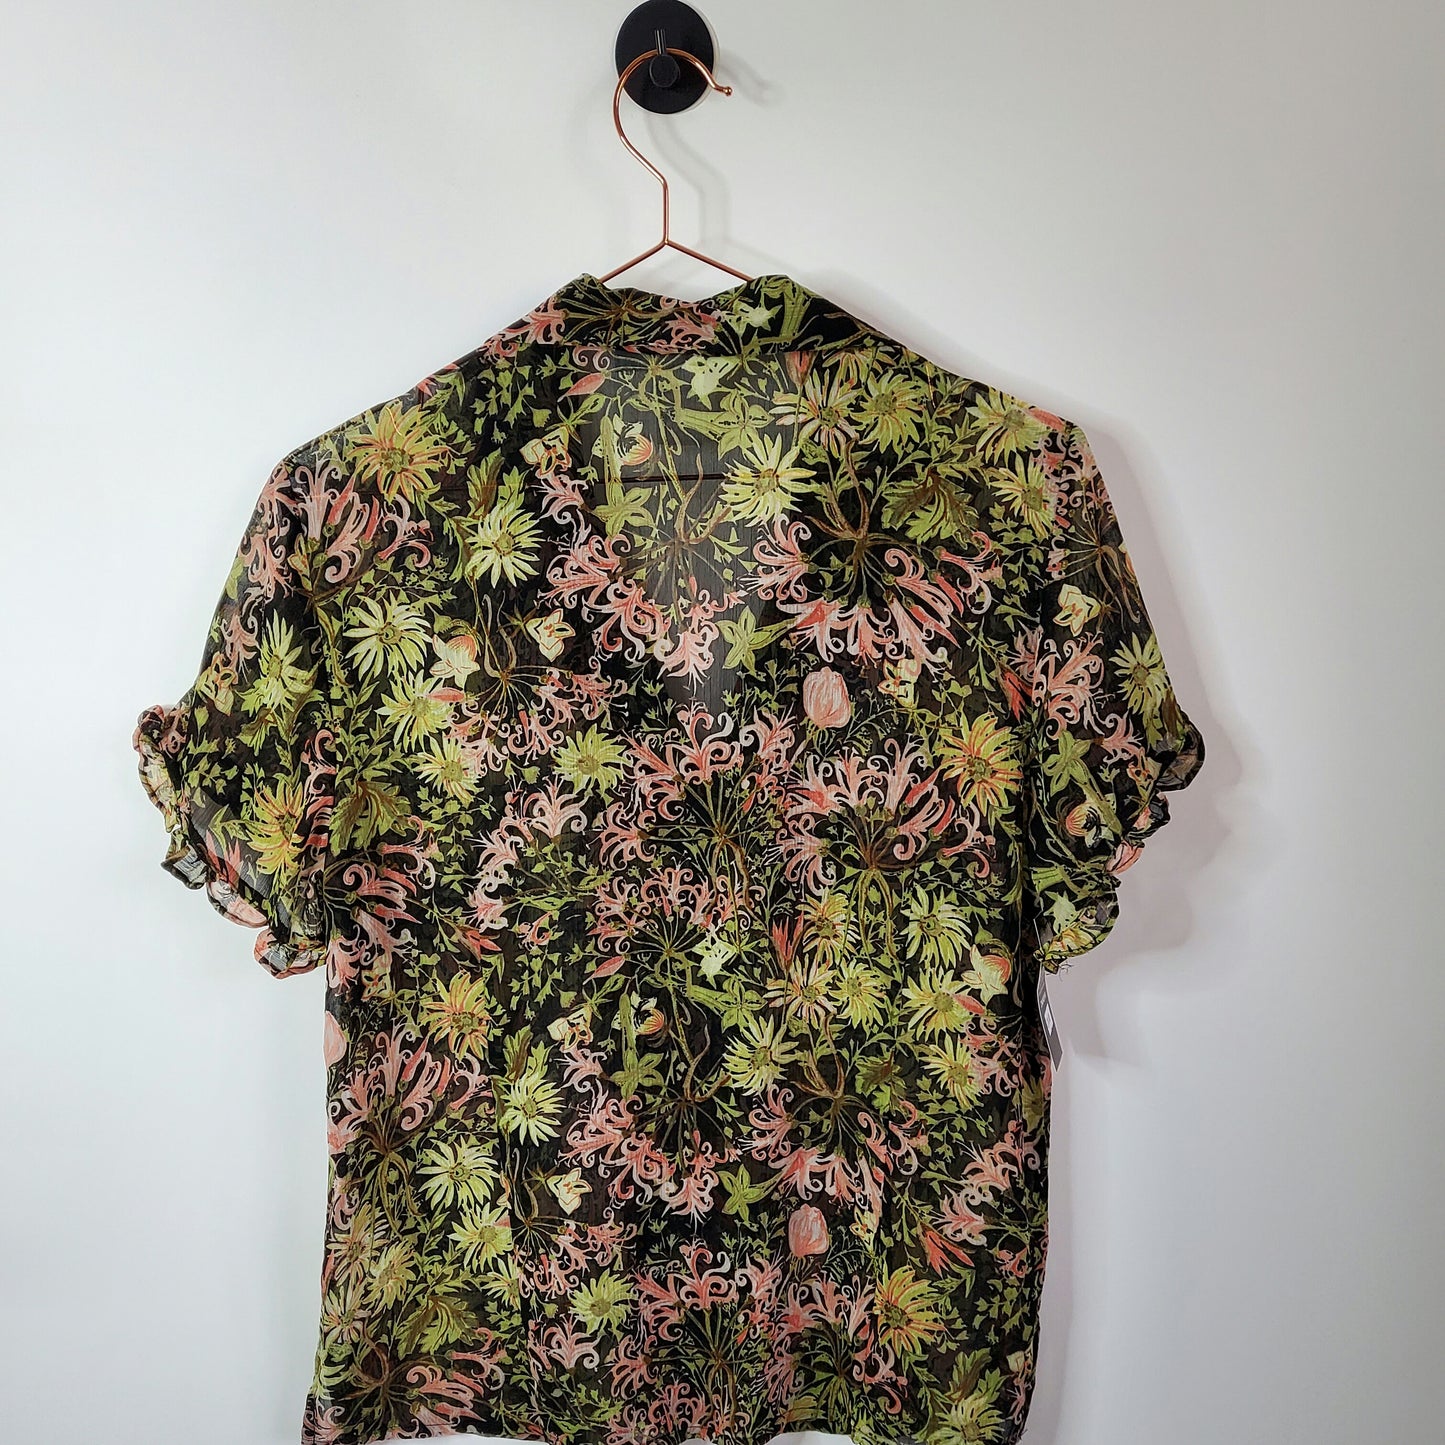 Vintage 90s Sheer Floral Women's Blouse Black and Green Size Large